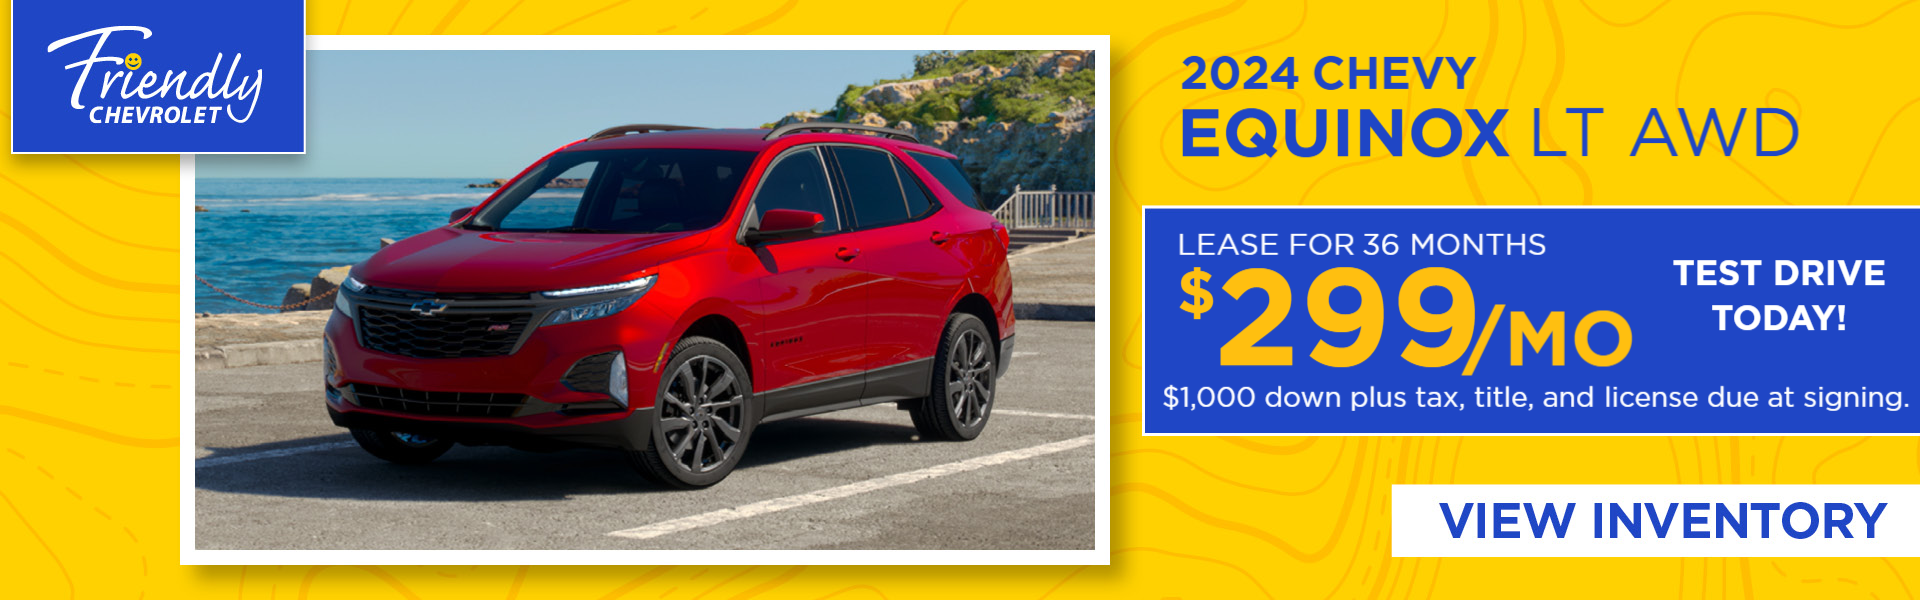 Lease a '24 Equinox for $299/mo